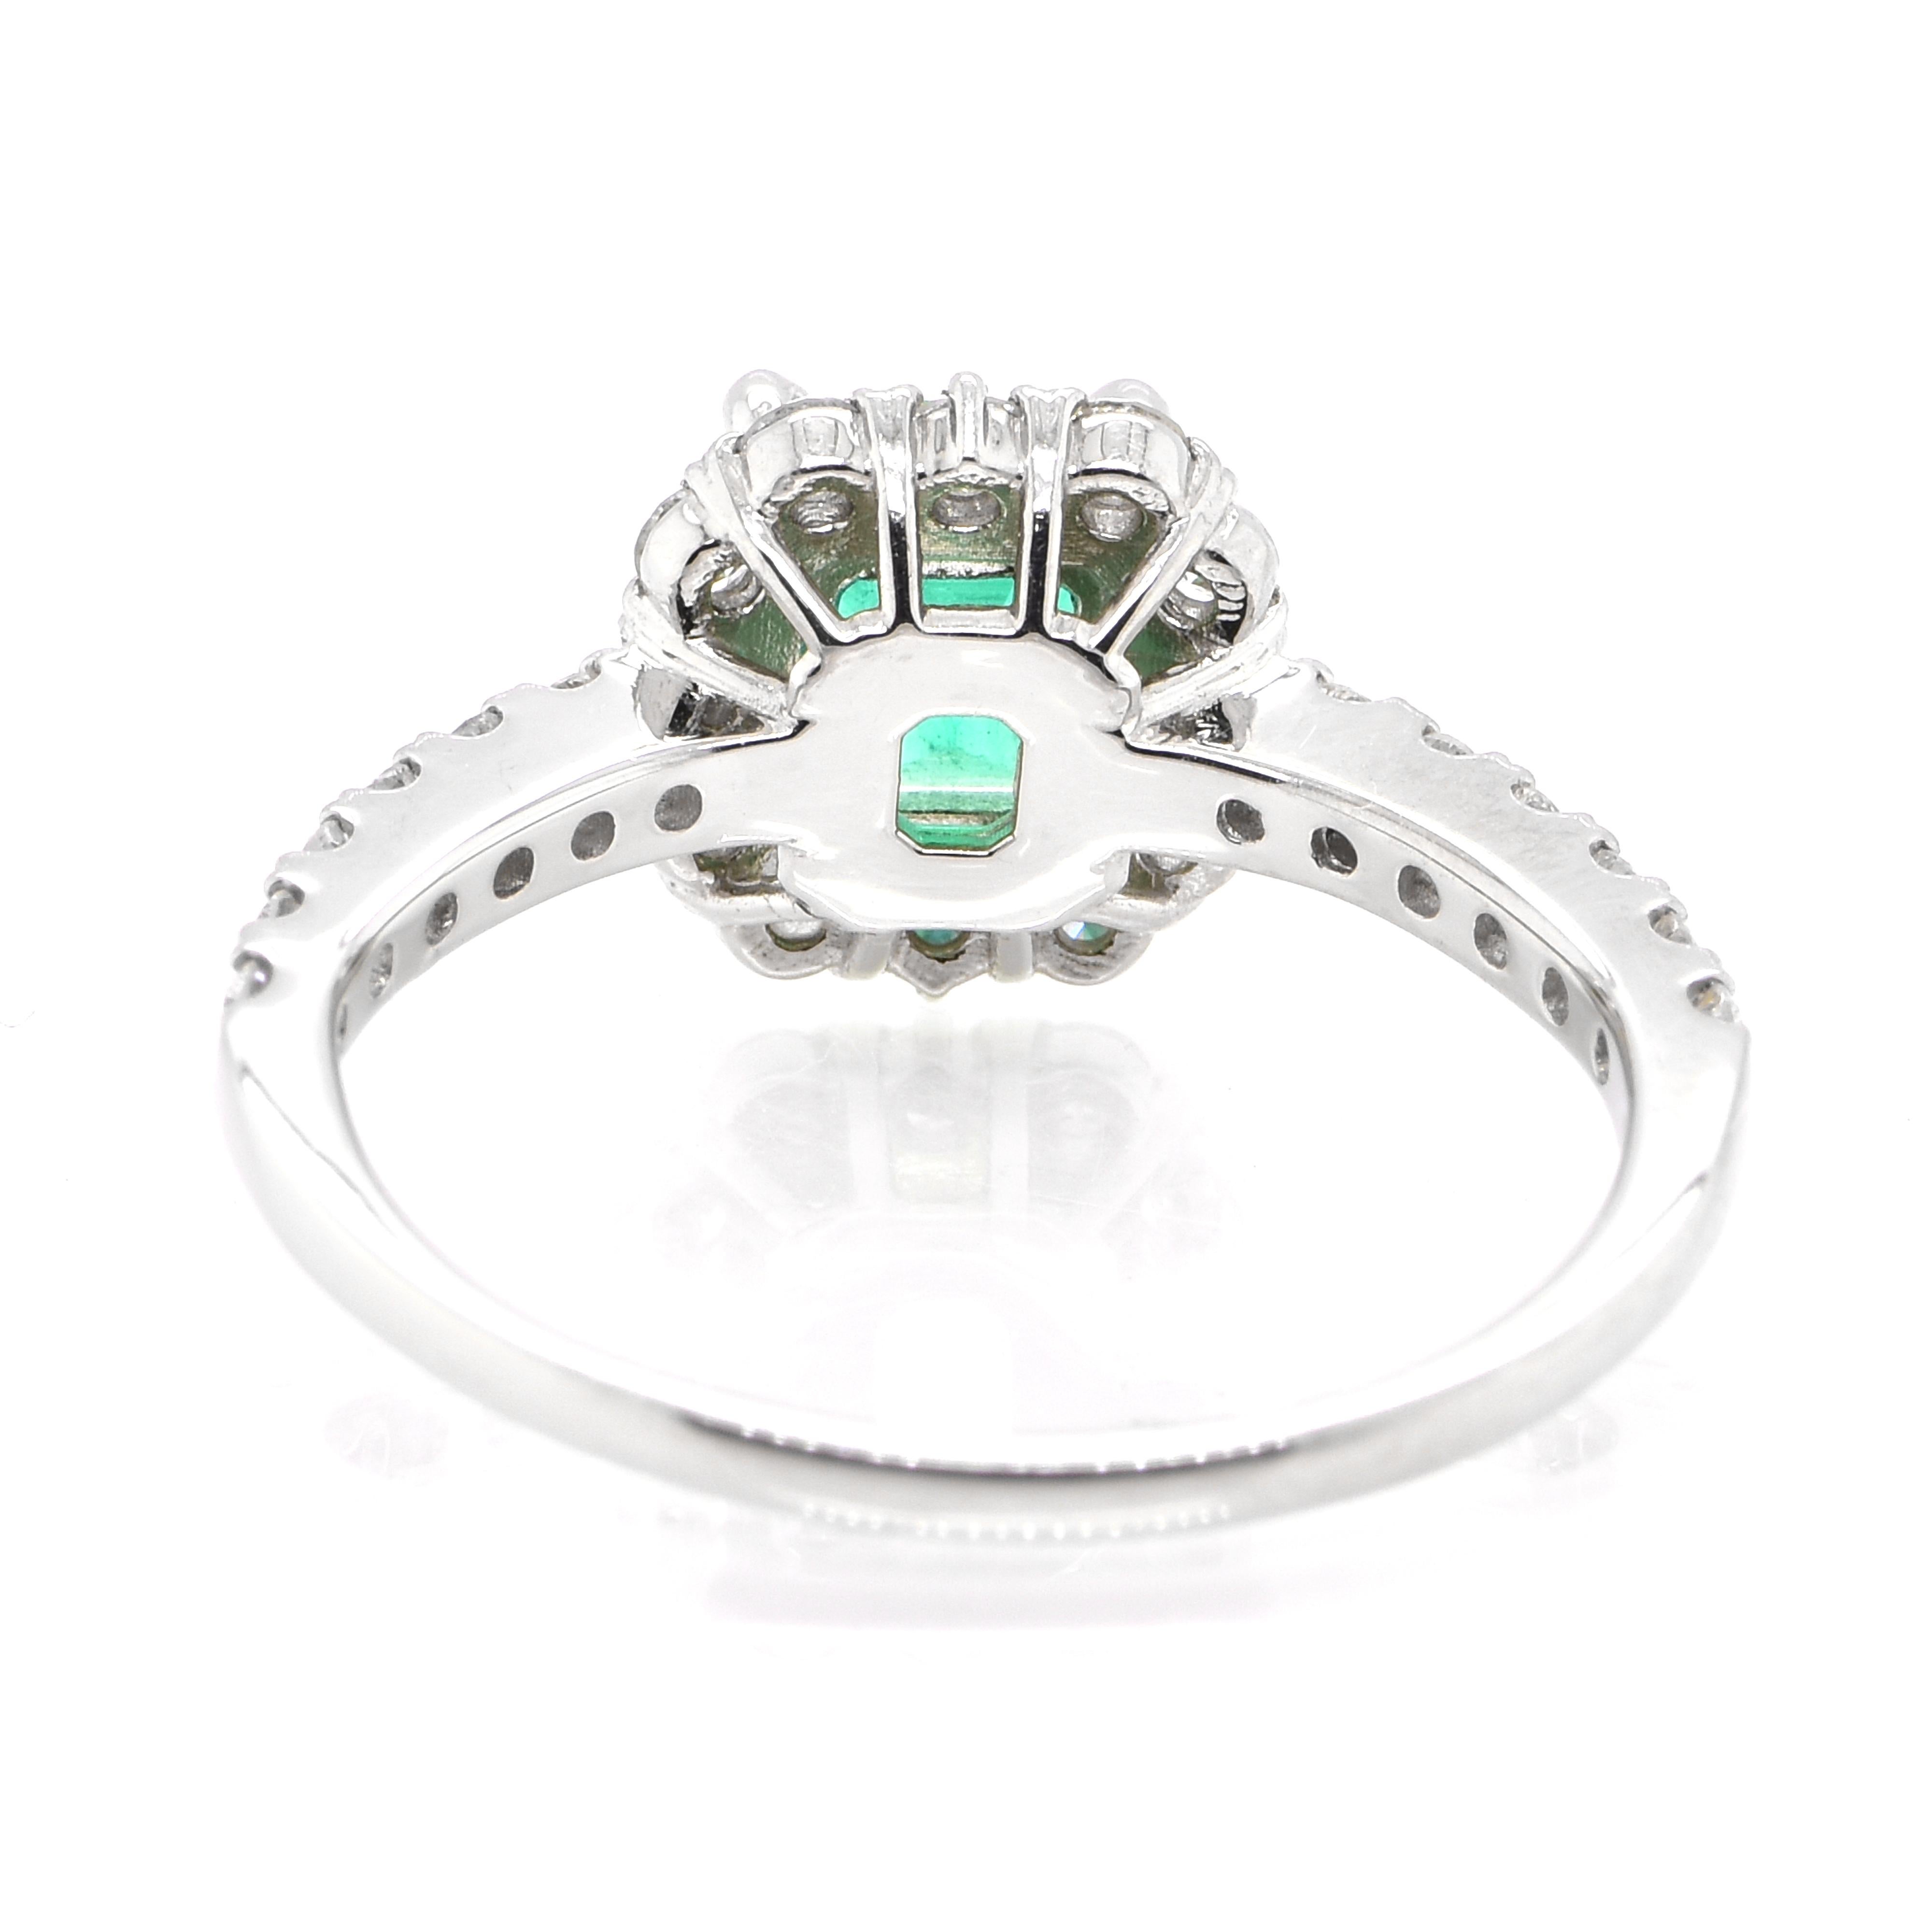 Women's 1.05 Carat Natural Colombian Emerald and Diamond Halo Ring set in Platinum For Sale